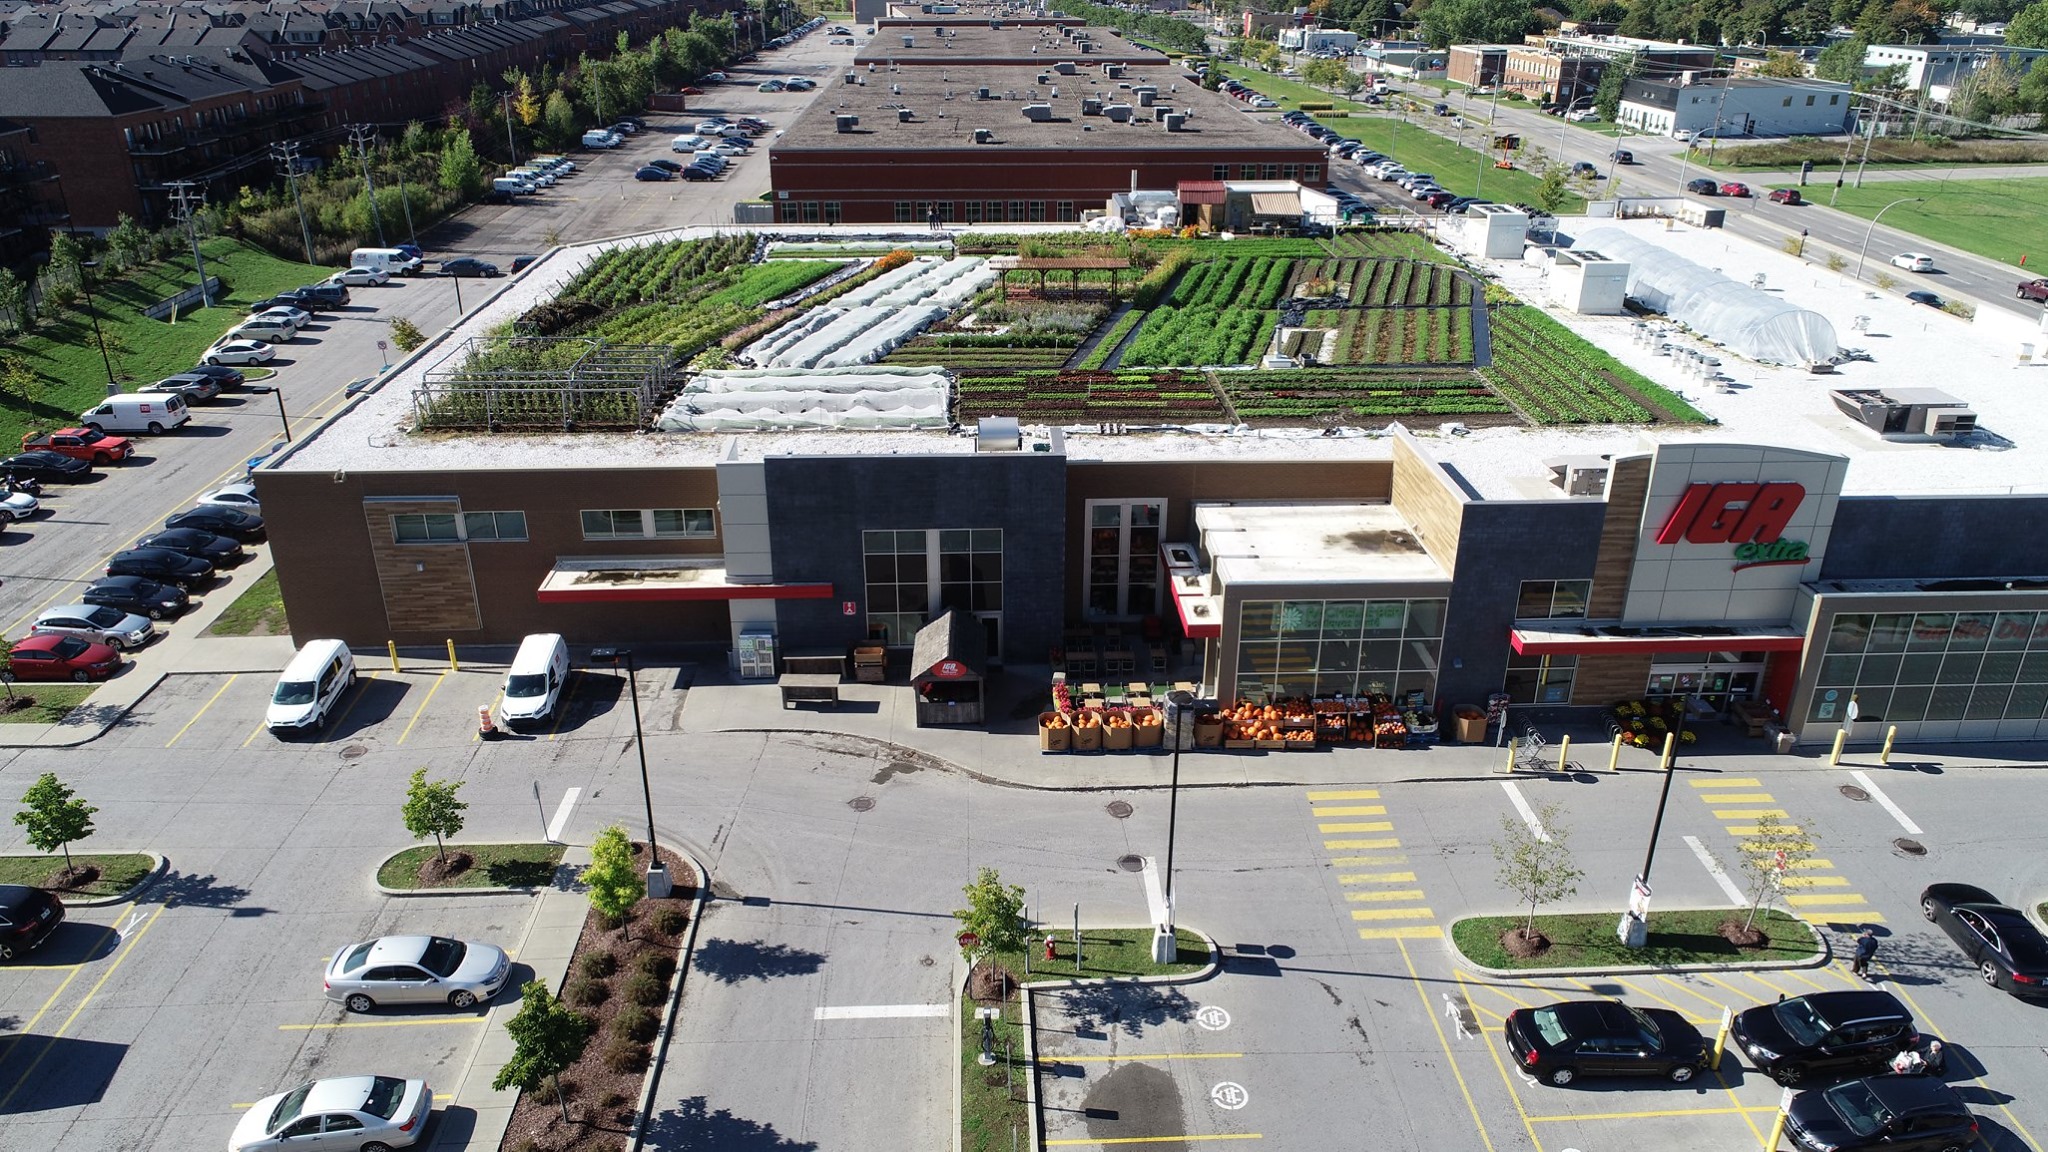 Local supermarket made a garden on their roof and sells the proceeds. What a concept.